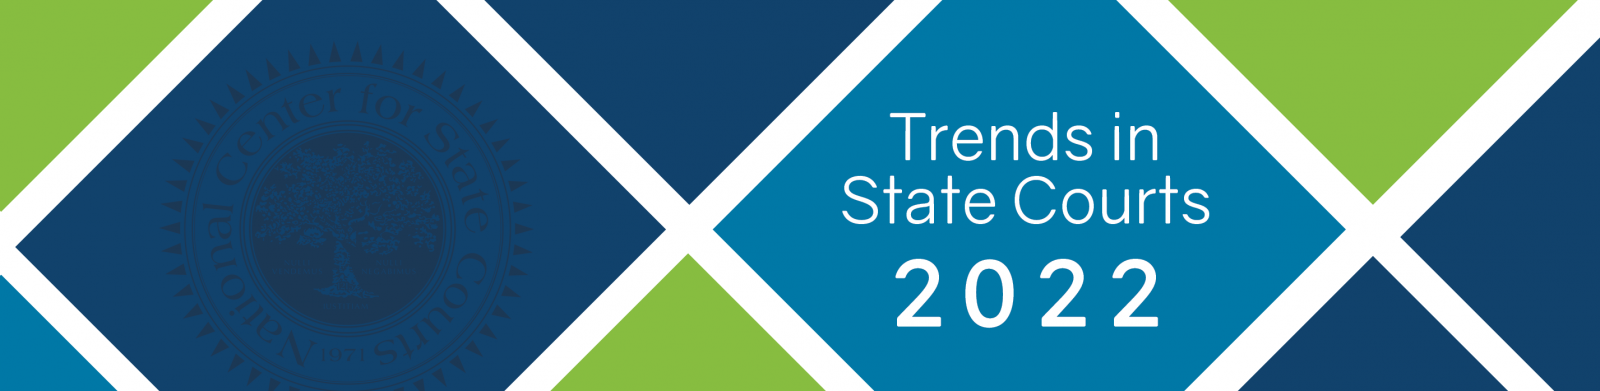 Cover image of Trends 2022 banner image